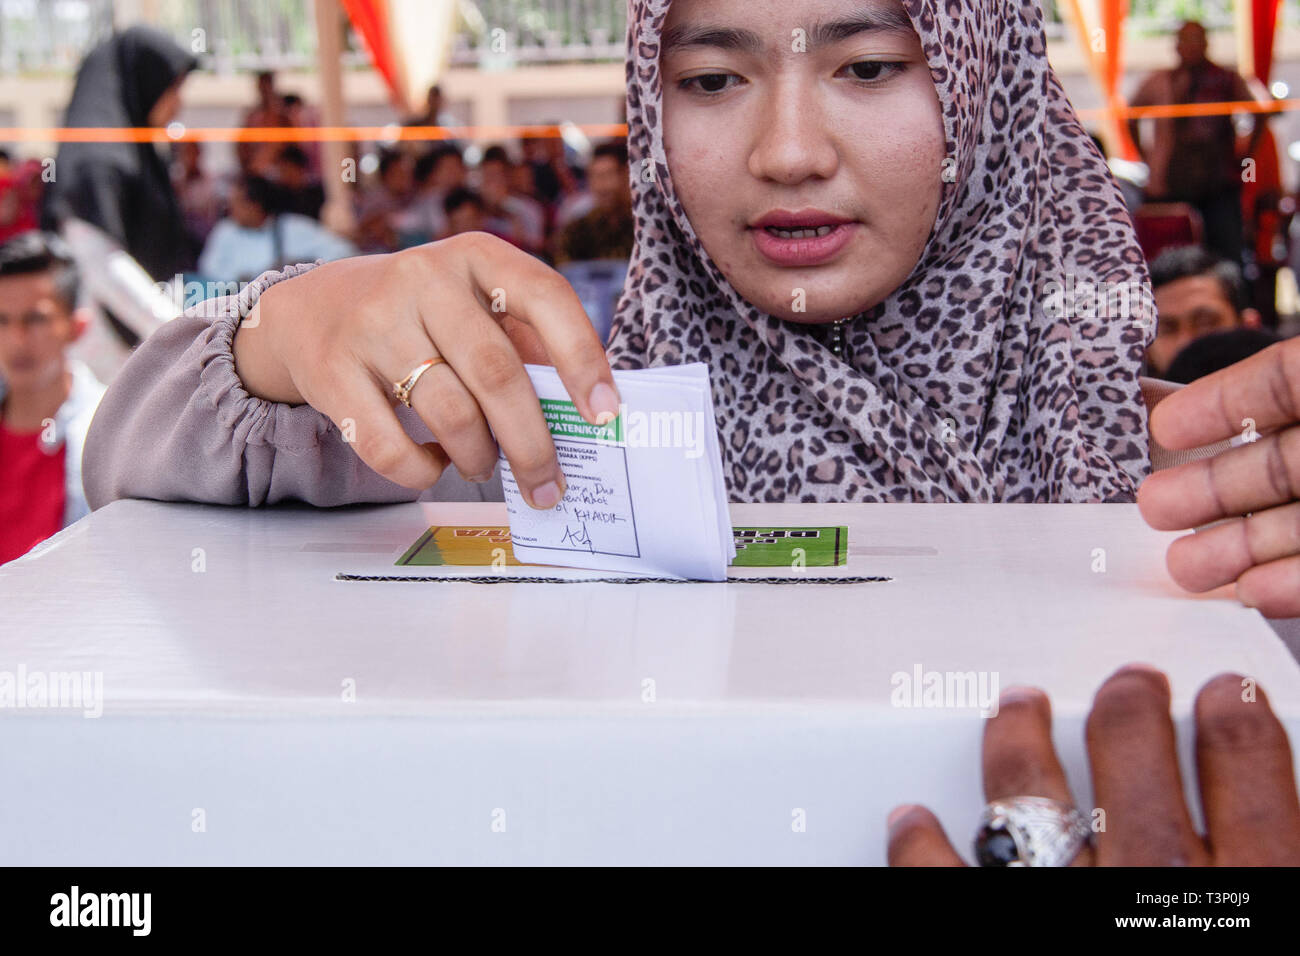 Lhokseumawe, Indonesia. 11th Apr, 2019. A woman seen casting her ballot during pre-election drill for president, vice-presidential candidates and legislative candidates in Lhokseumawe, Aceh province, Indonesia. Elections in Indonesia will take place next week on Wednesday April 17, 2019. Credit: SOPA Images Limited/Alamy Live News Stock Photo